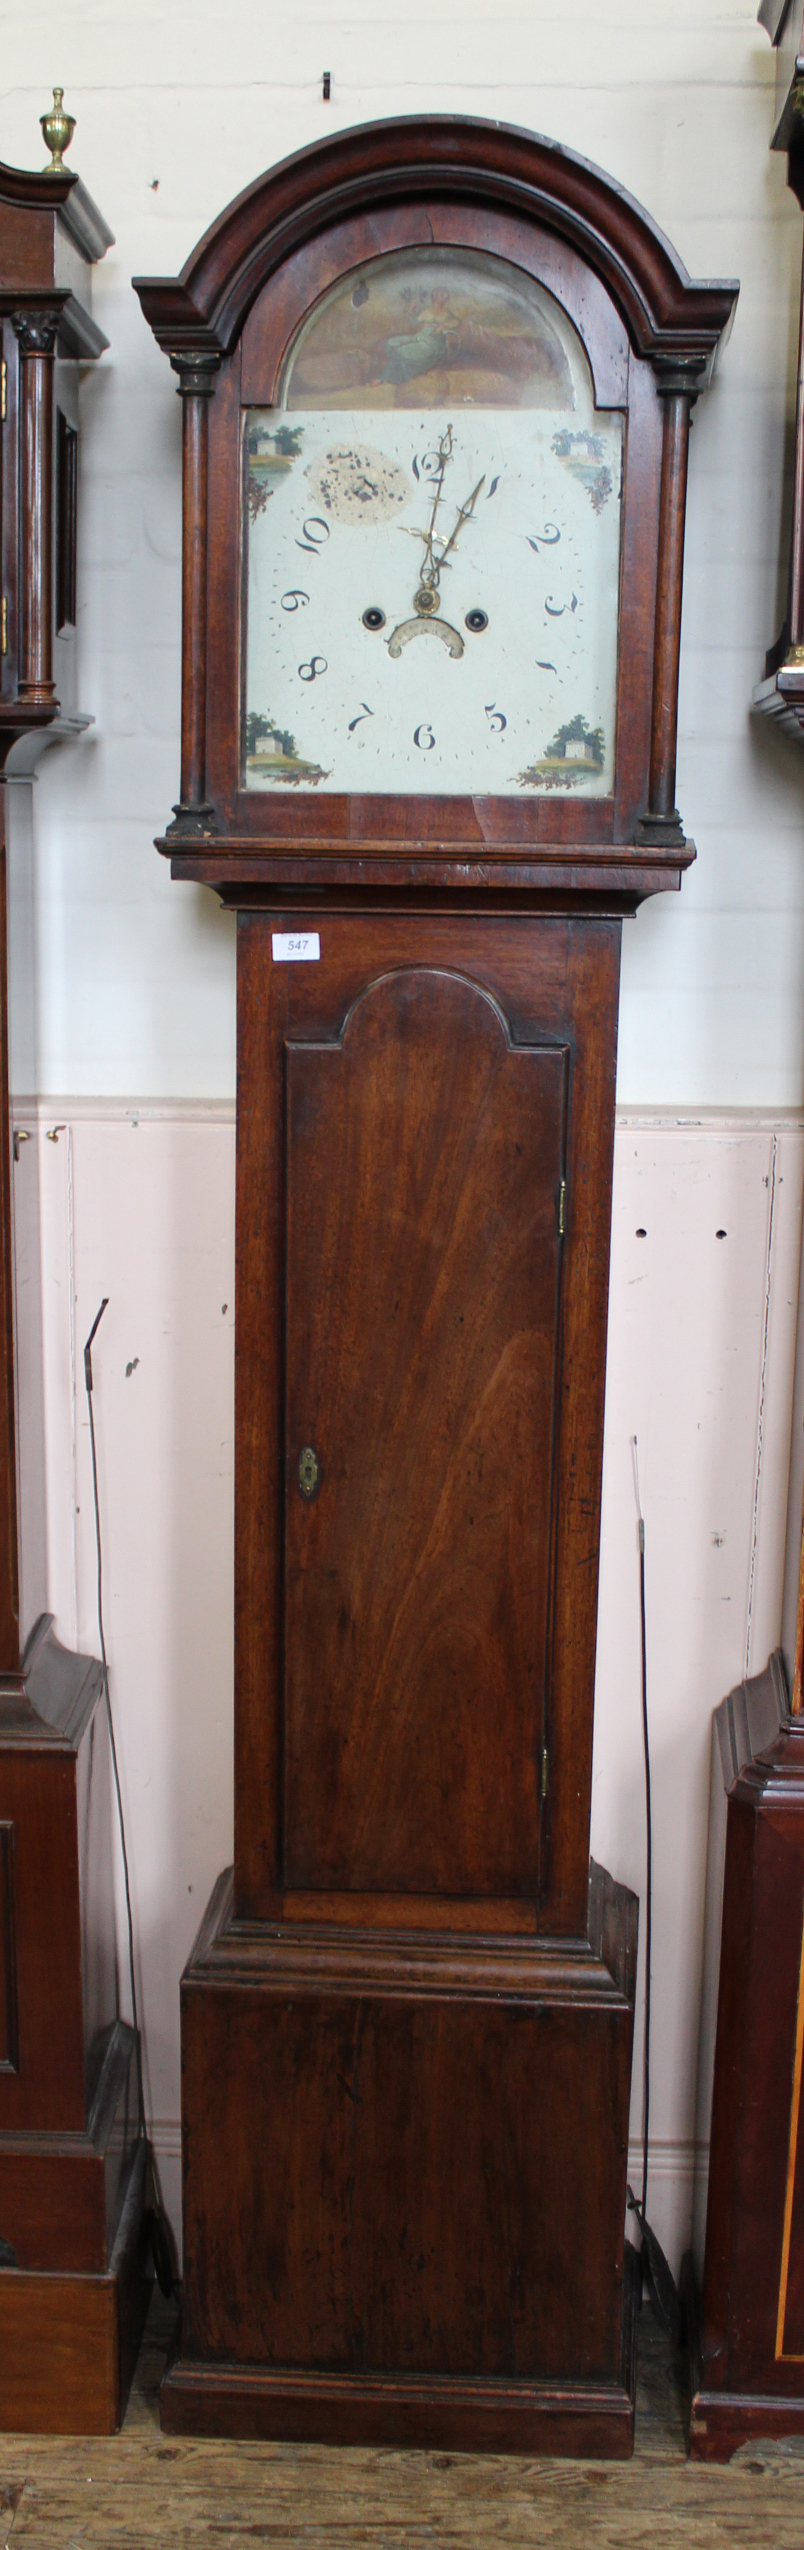 An early 19th Century mahogany arch dial cottage long case clock with painted face, - Image 2 of 3